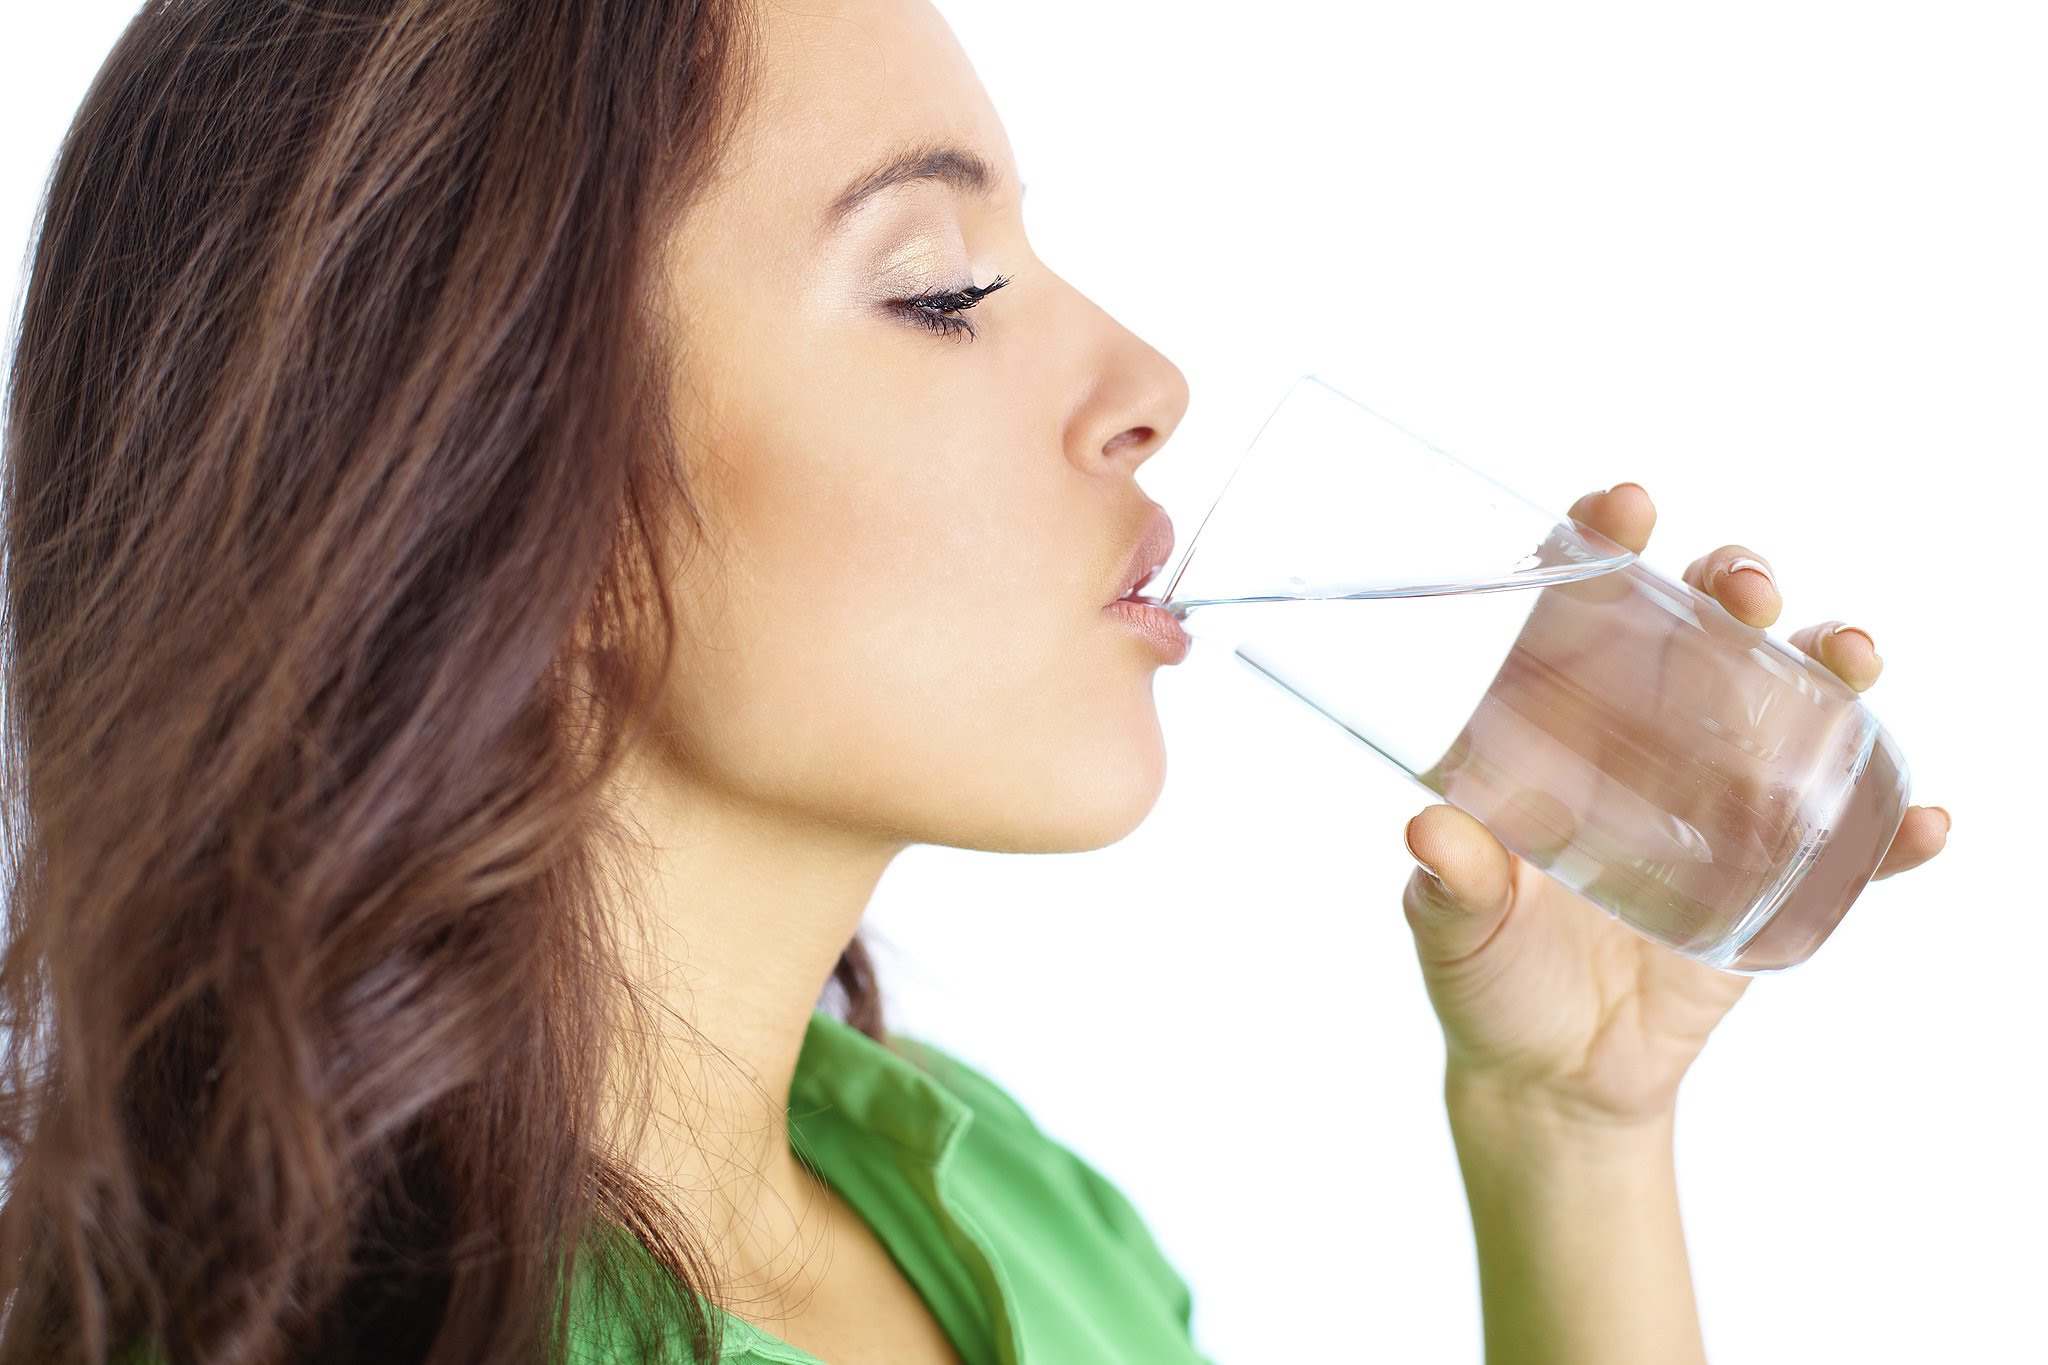 Drink Lots of Water to Lose Weight